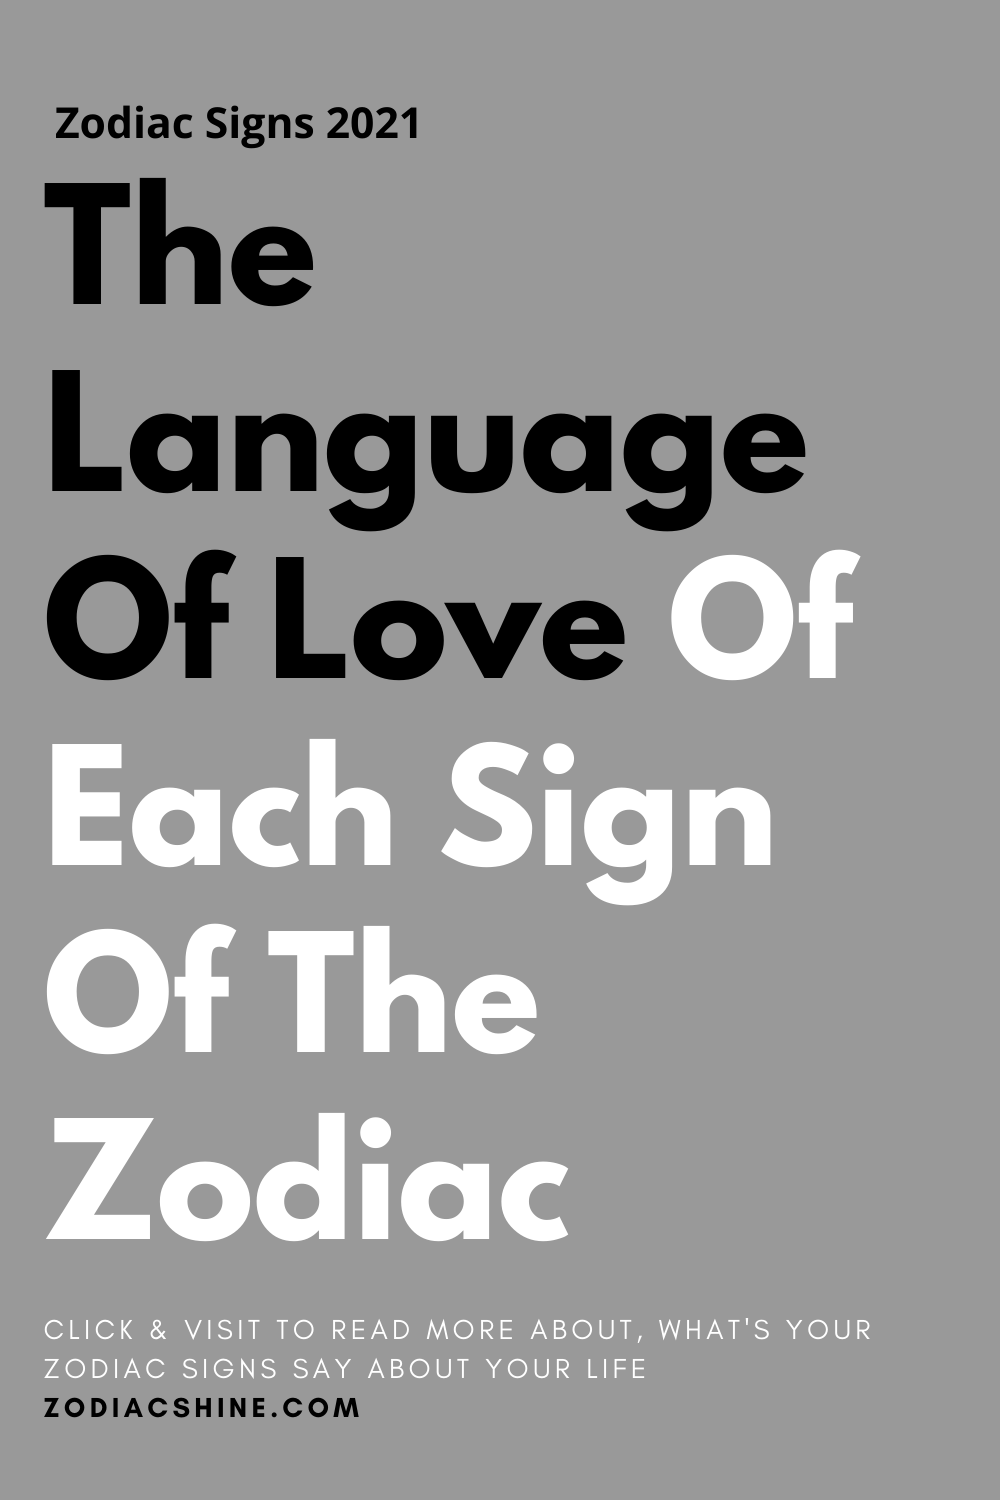 The Language Of Love Of Each Sign Of The Zodiac